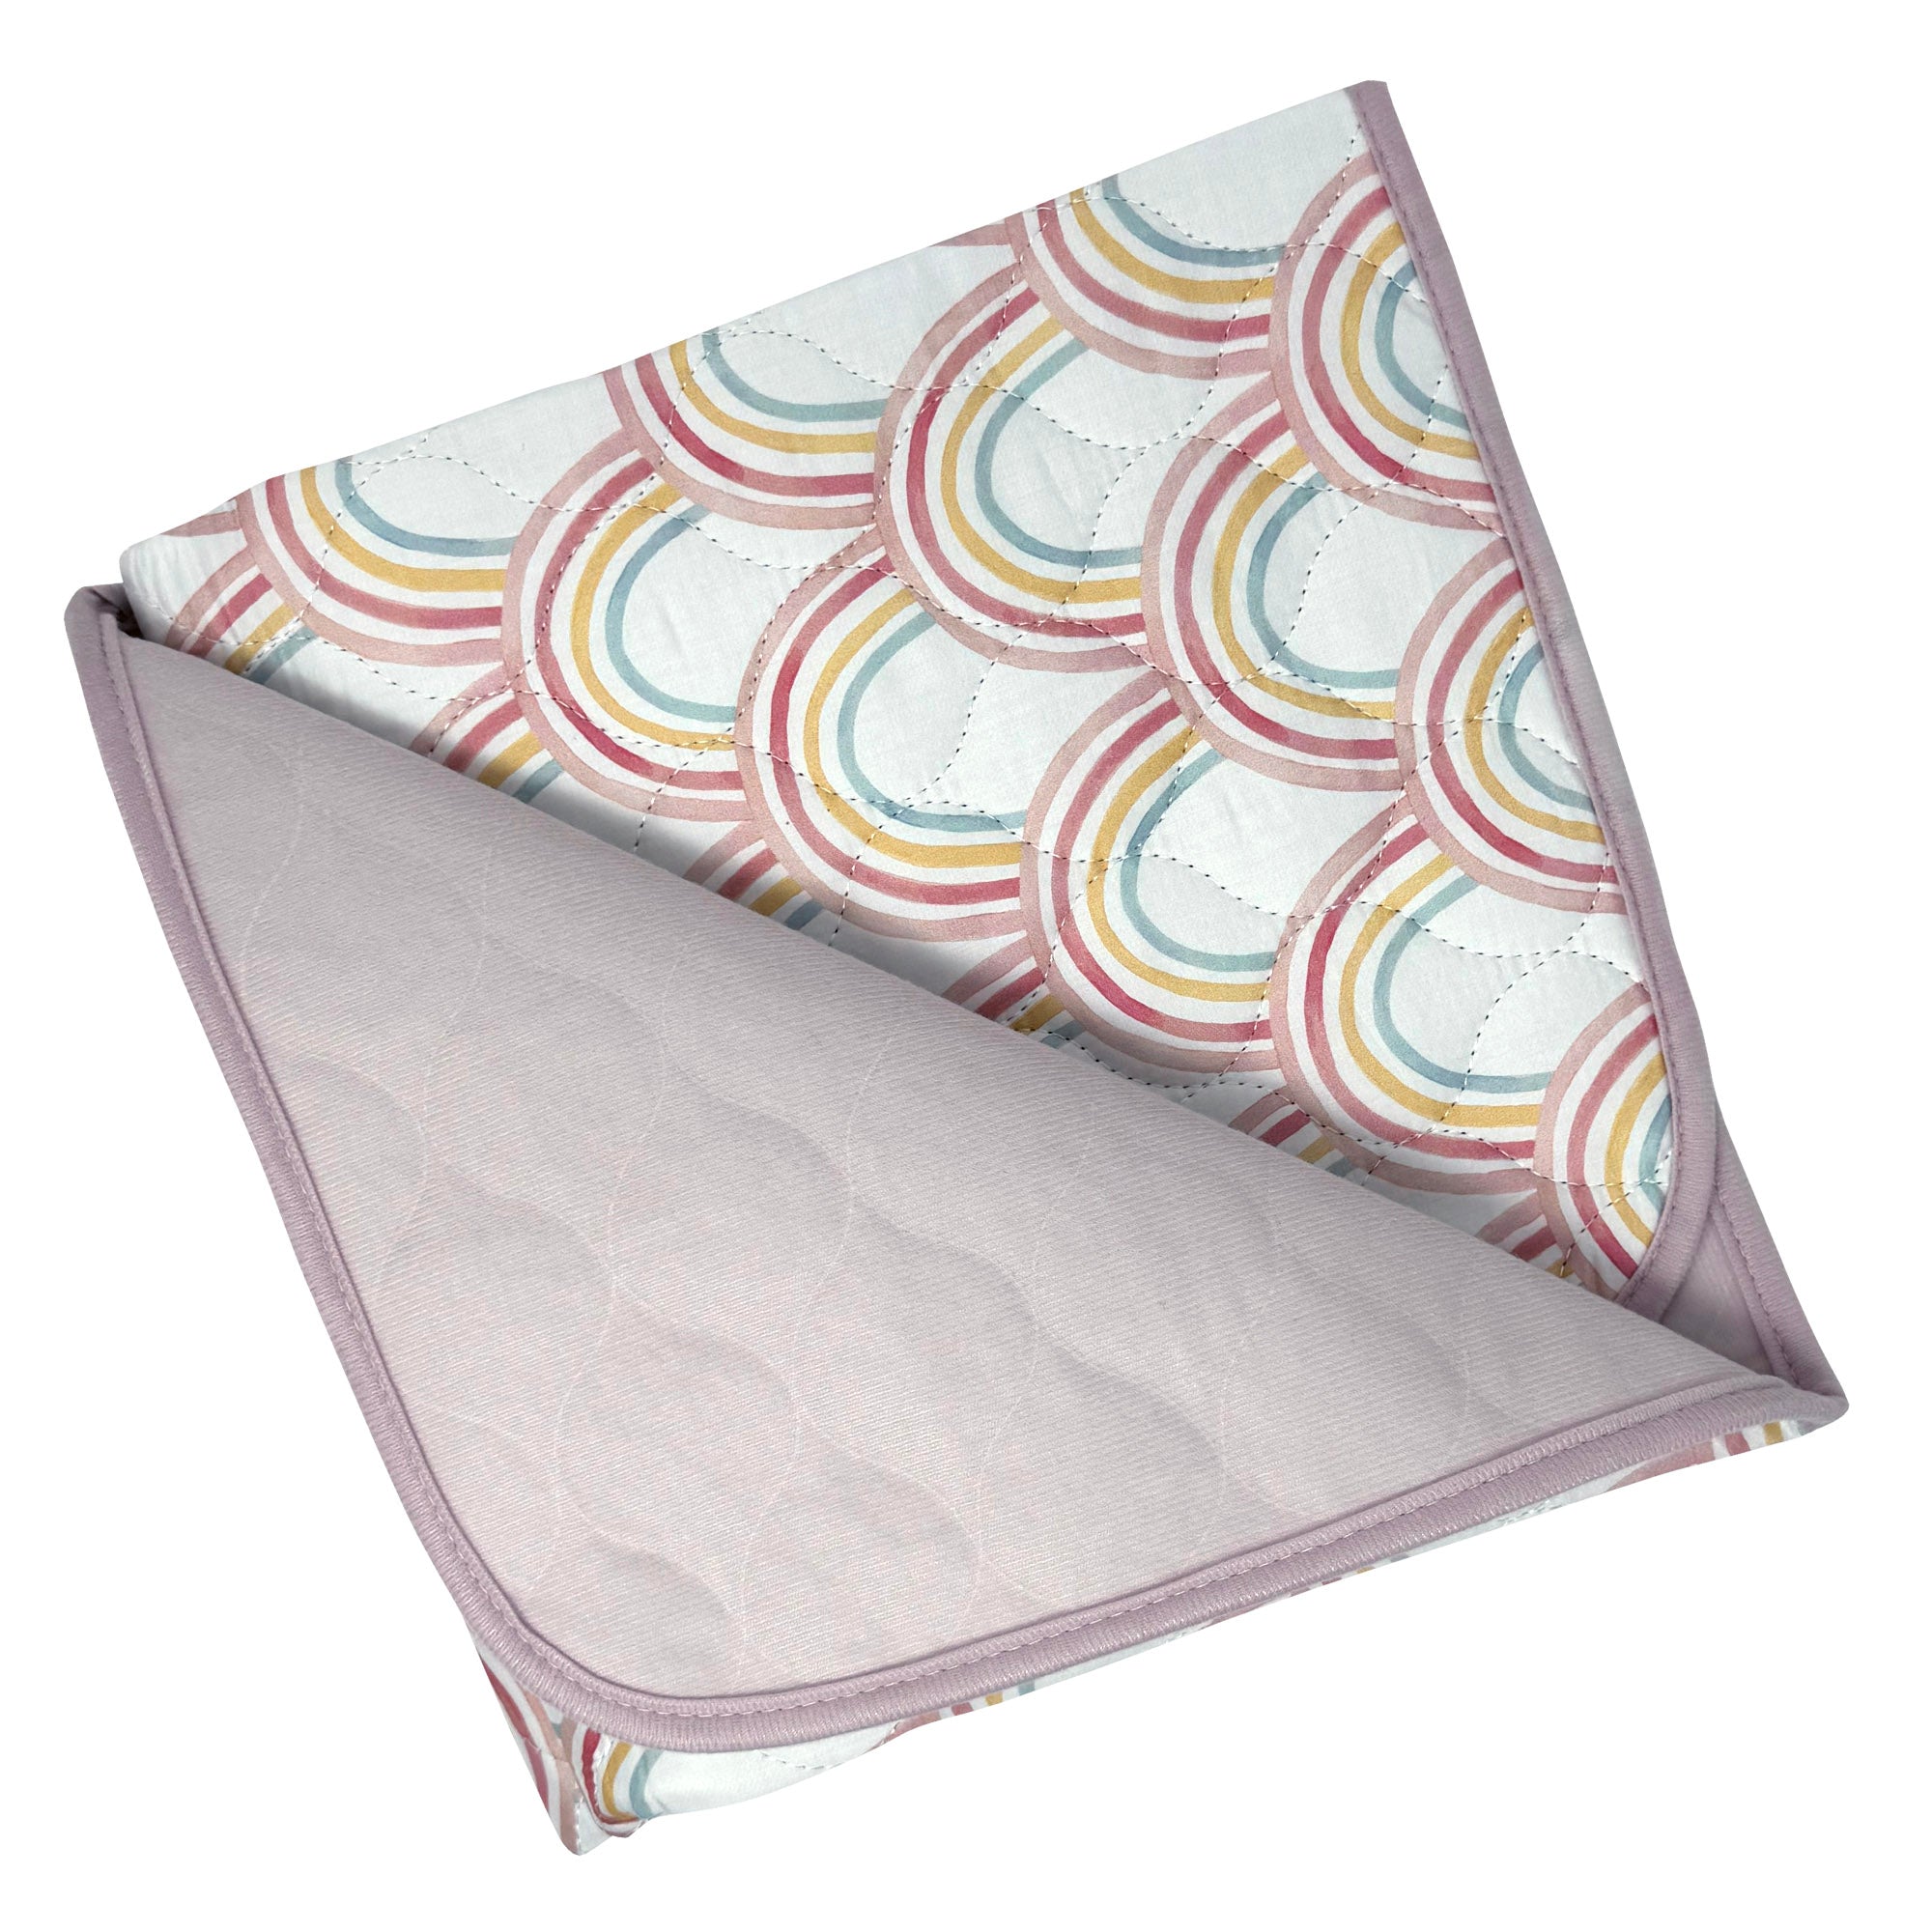 Organic Bamboo Incontinence Pads for Kids - Rainbow